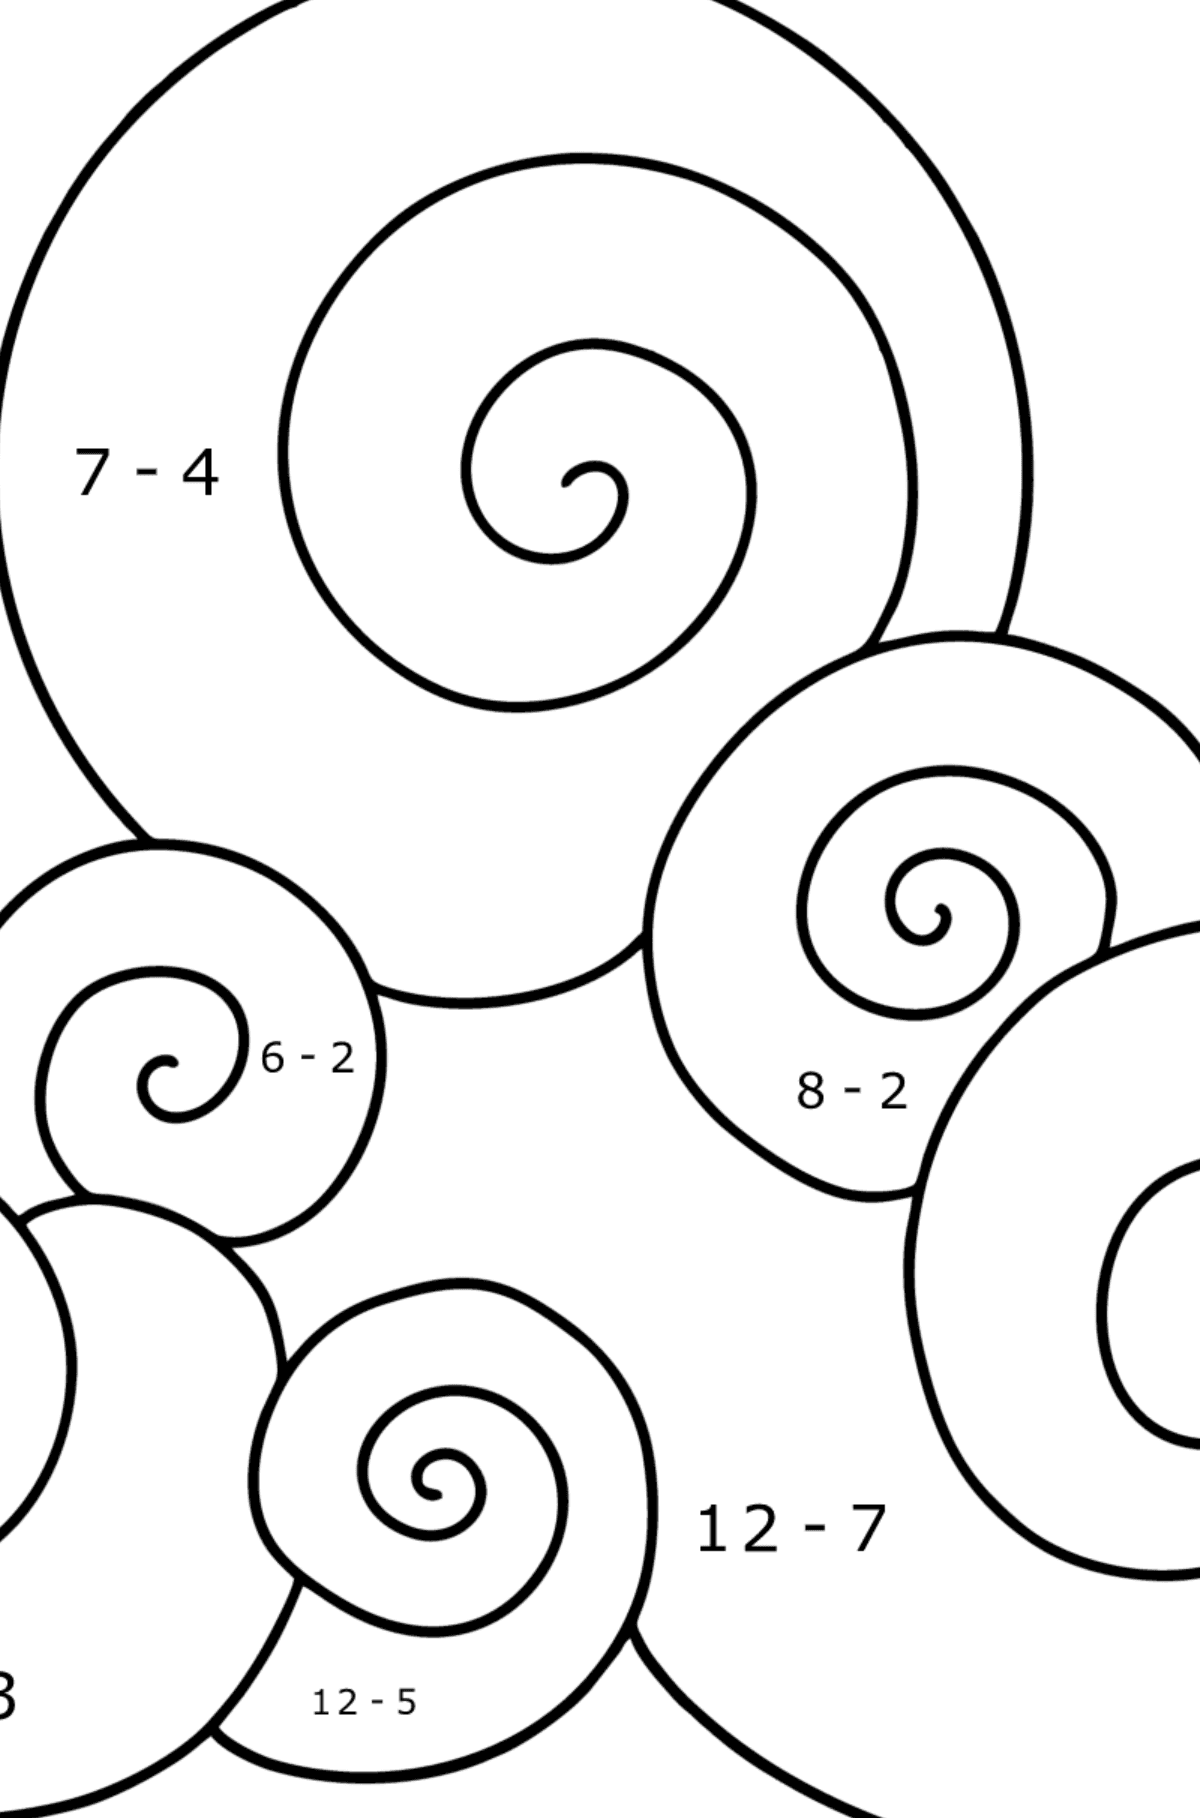 Simple Zen clouds coloring page - Math Coloring - Subtraction for Kids